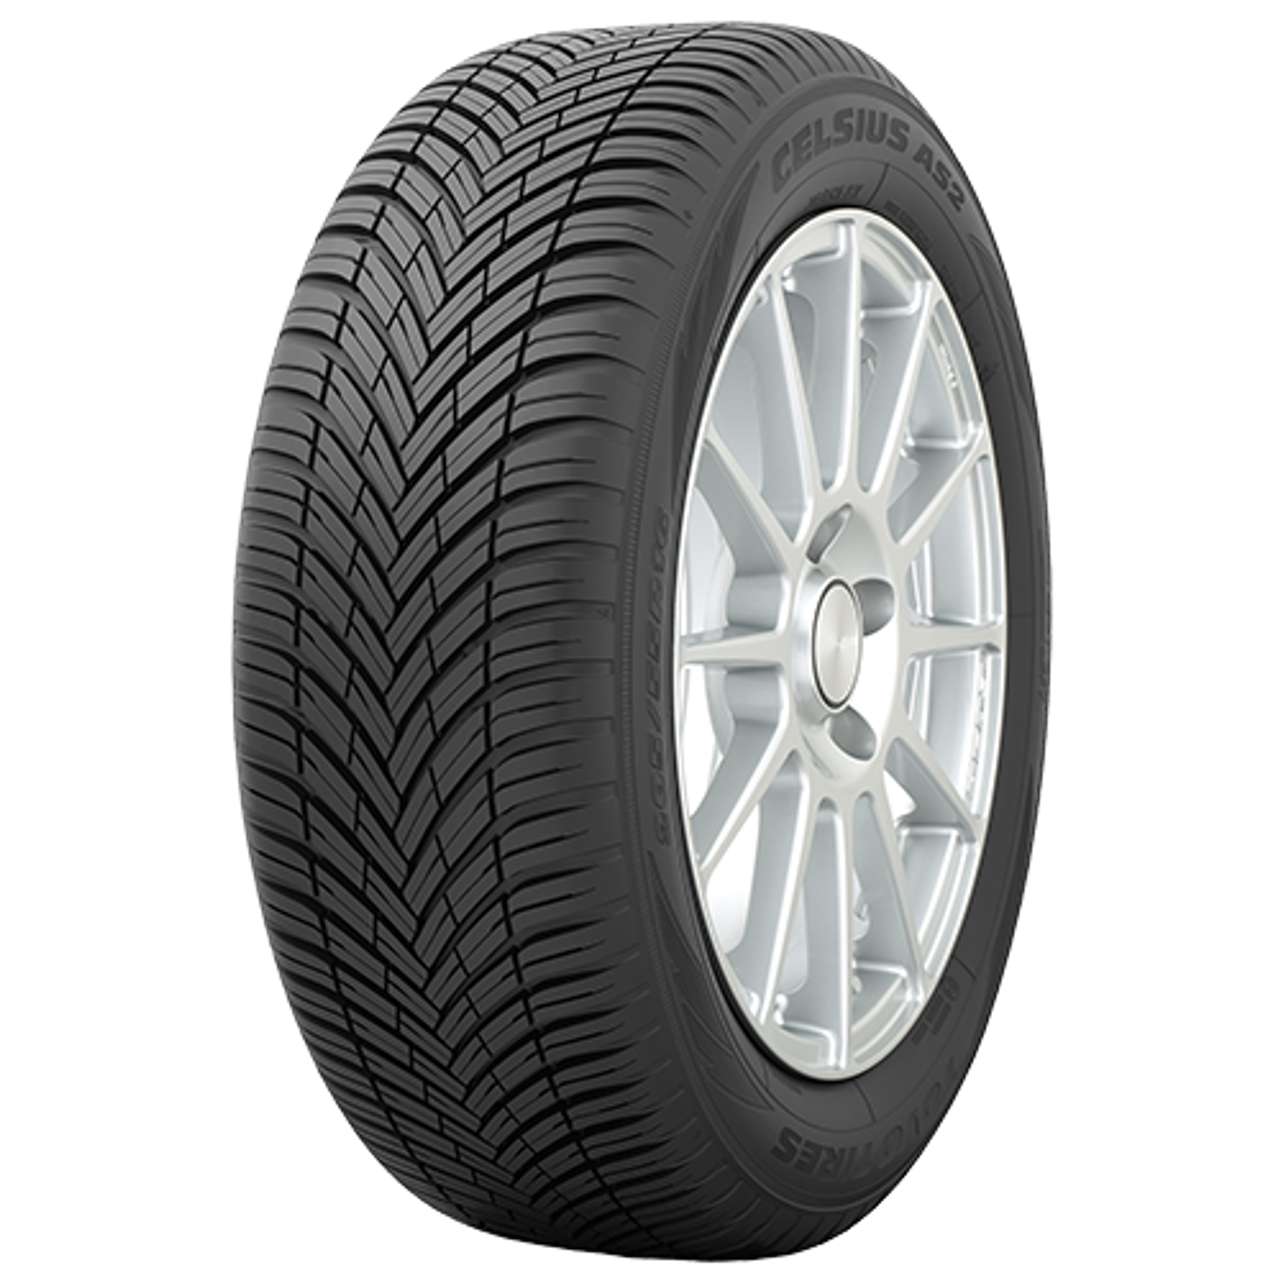 TOYO CELSIUS AS2 215/65R16 102V BSW